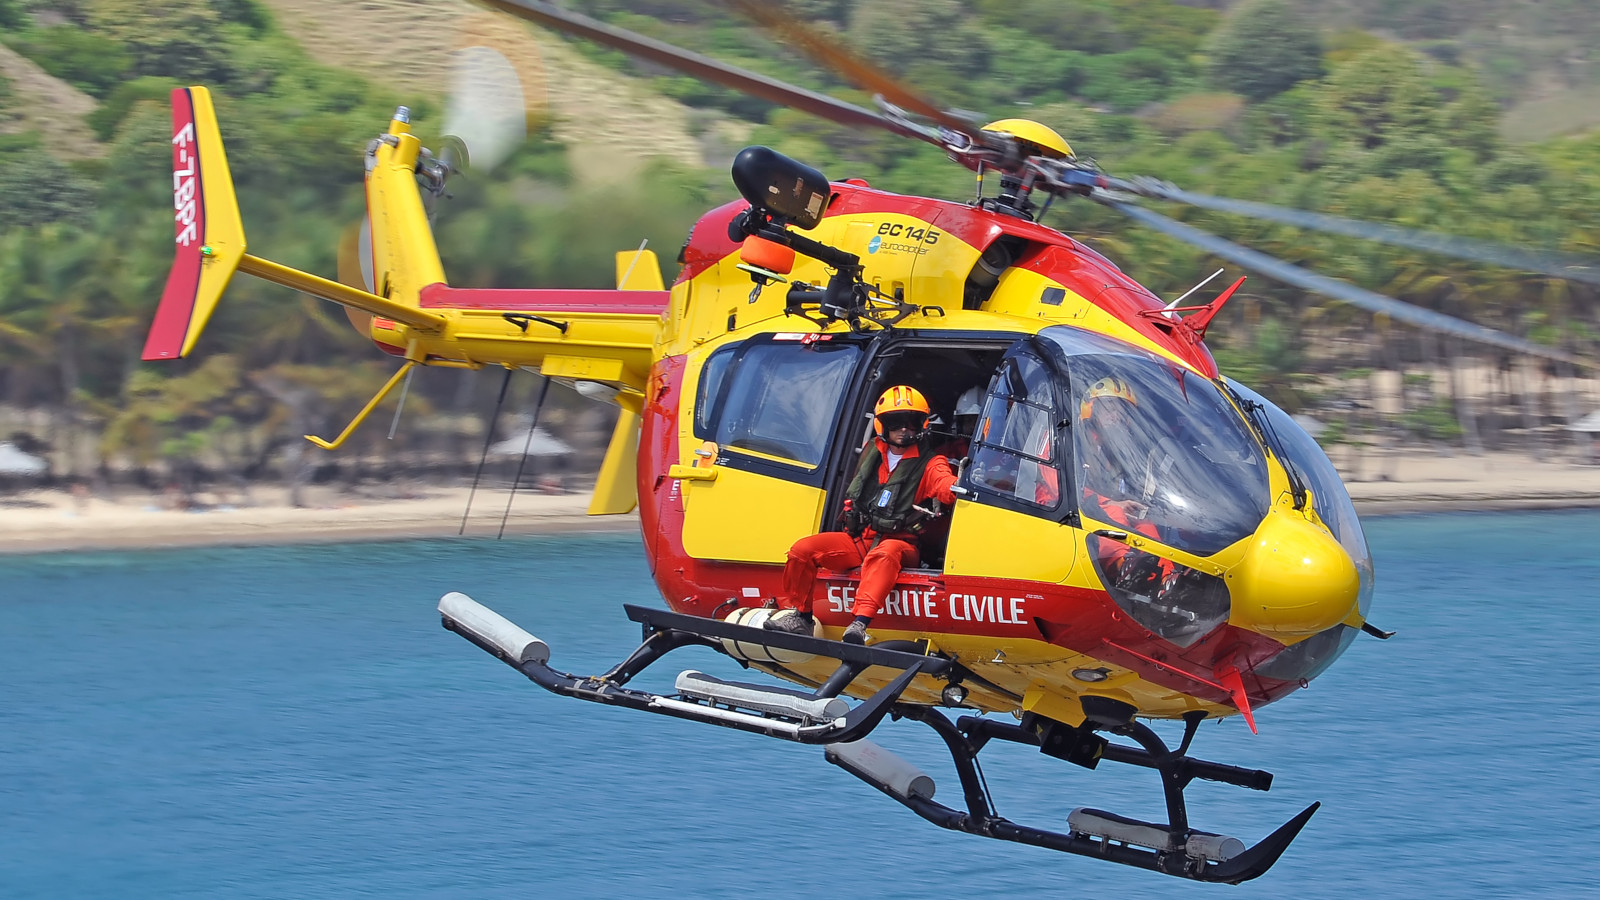 Airbus Helicopters, Babcock to Support French Ministry of Interior’s EC145s